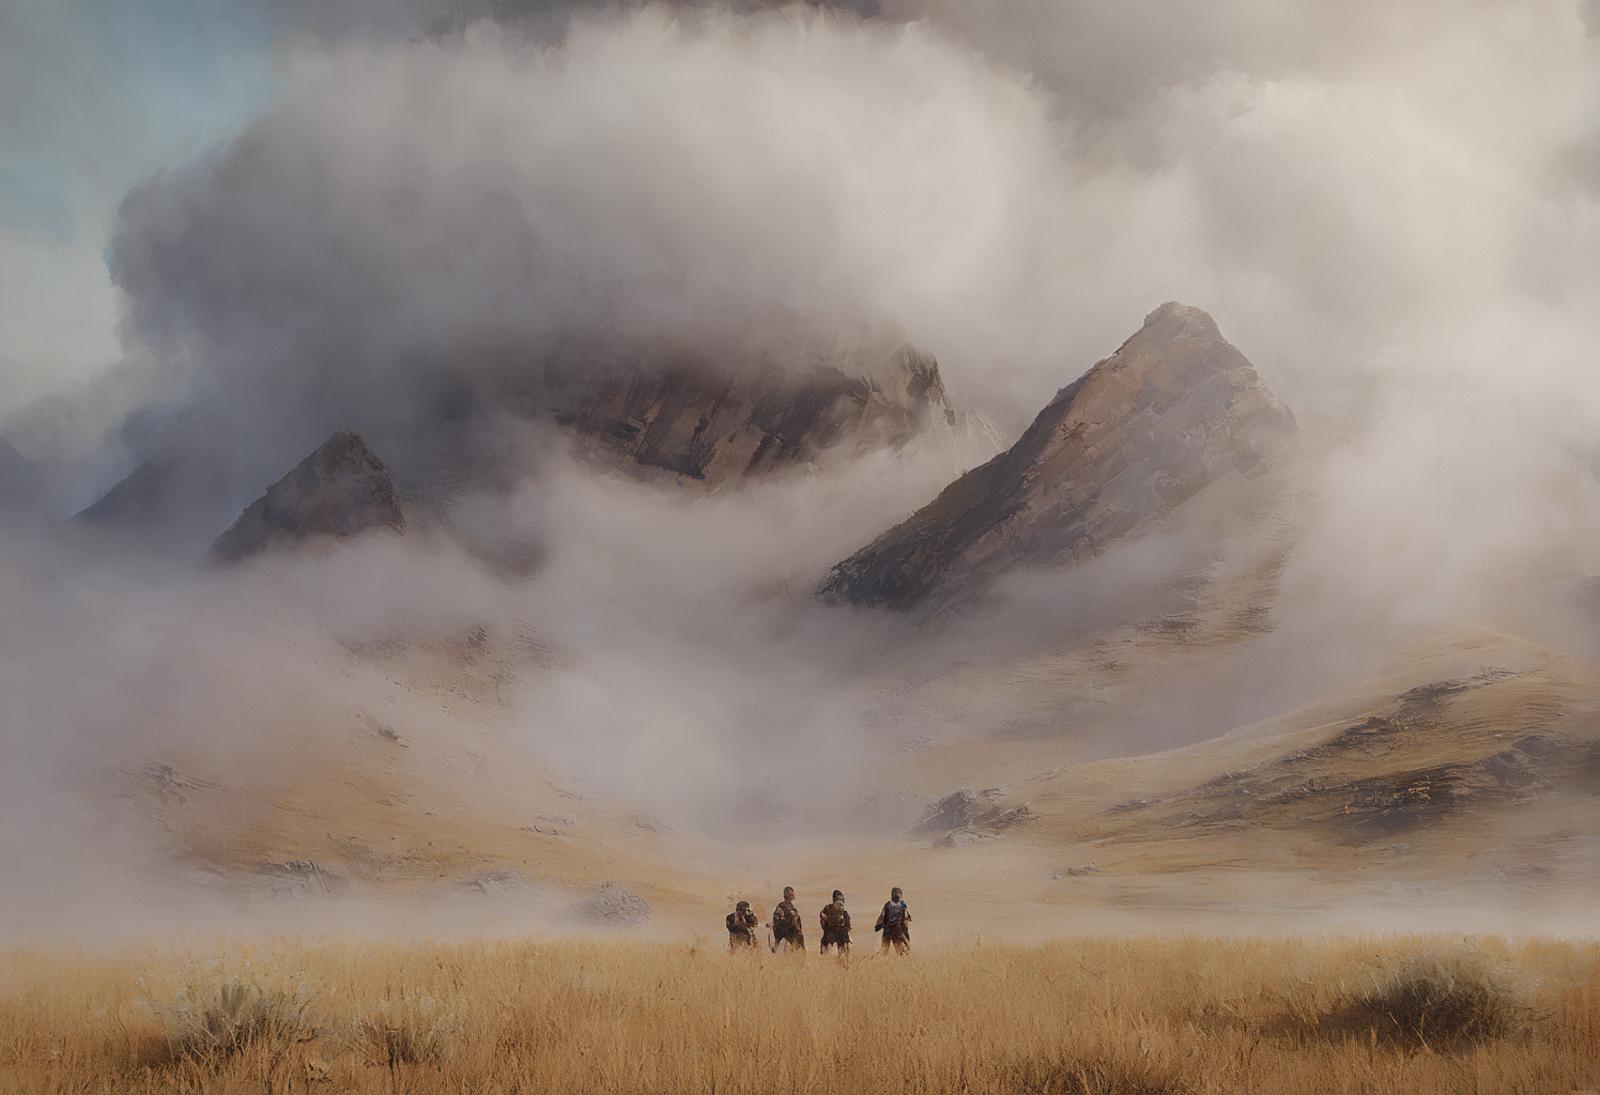 A group of four people riding horses in a foggy valley with mountains in the background.